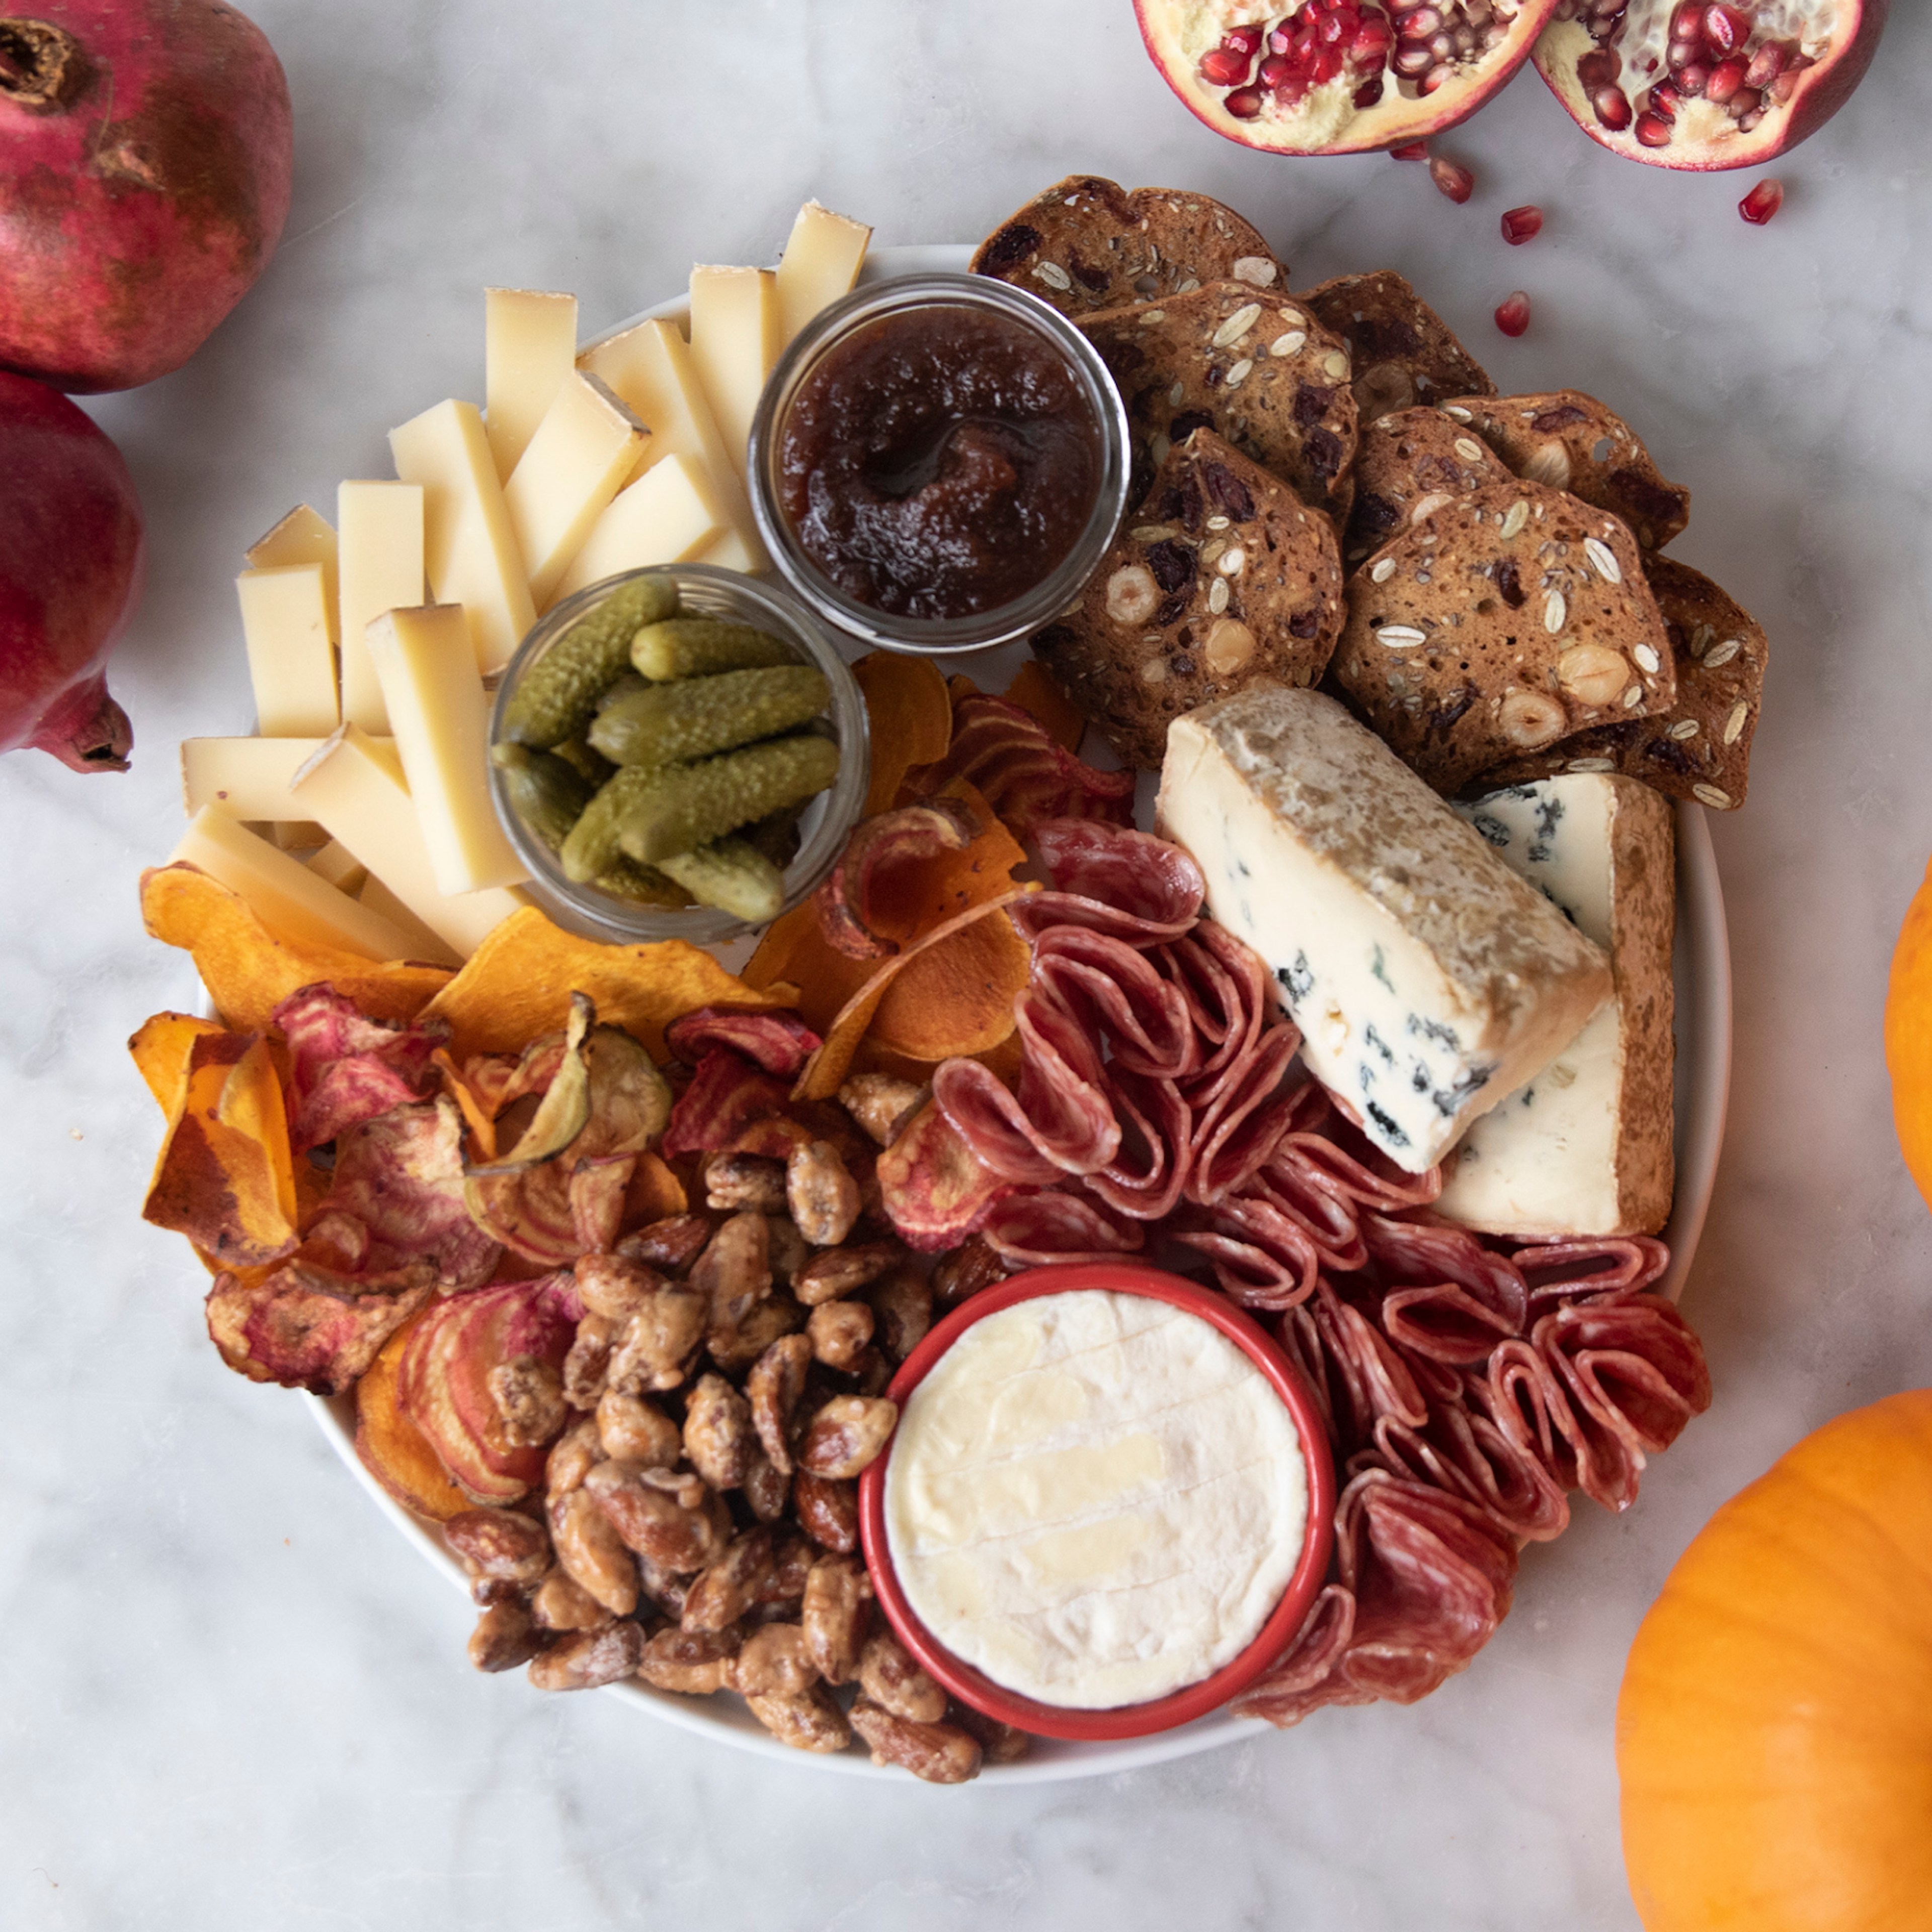 How to Make Cheese Boards: The Ultimate Guide – Cheese Grotto